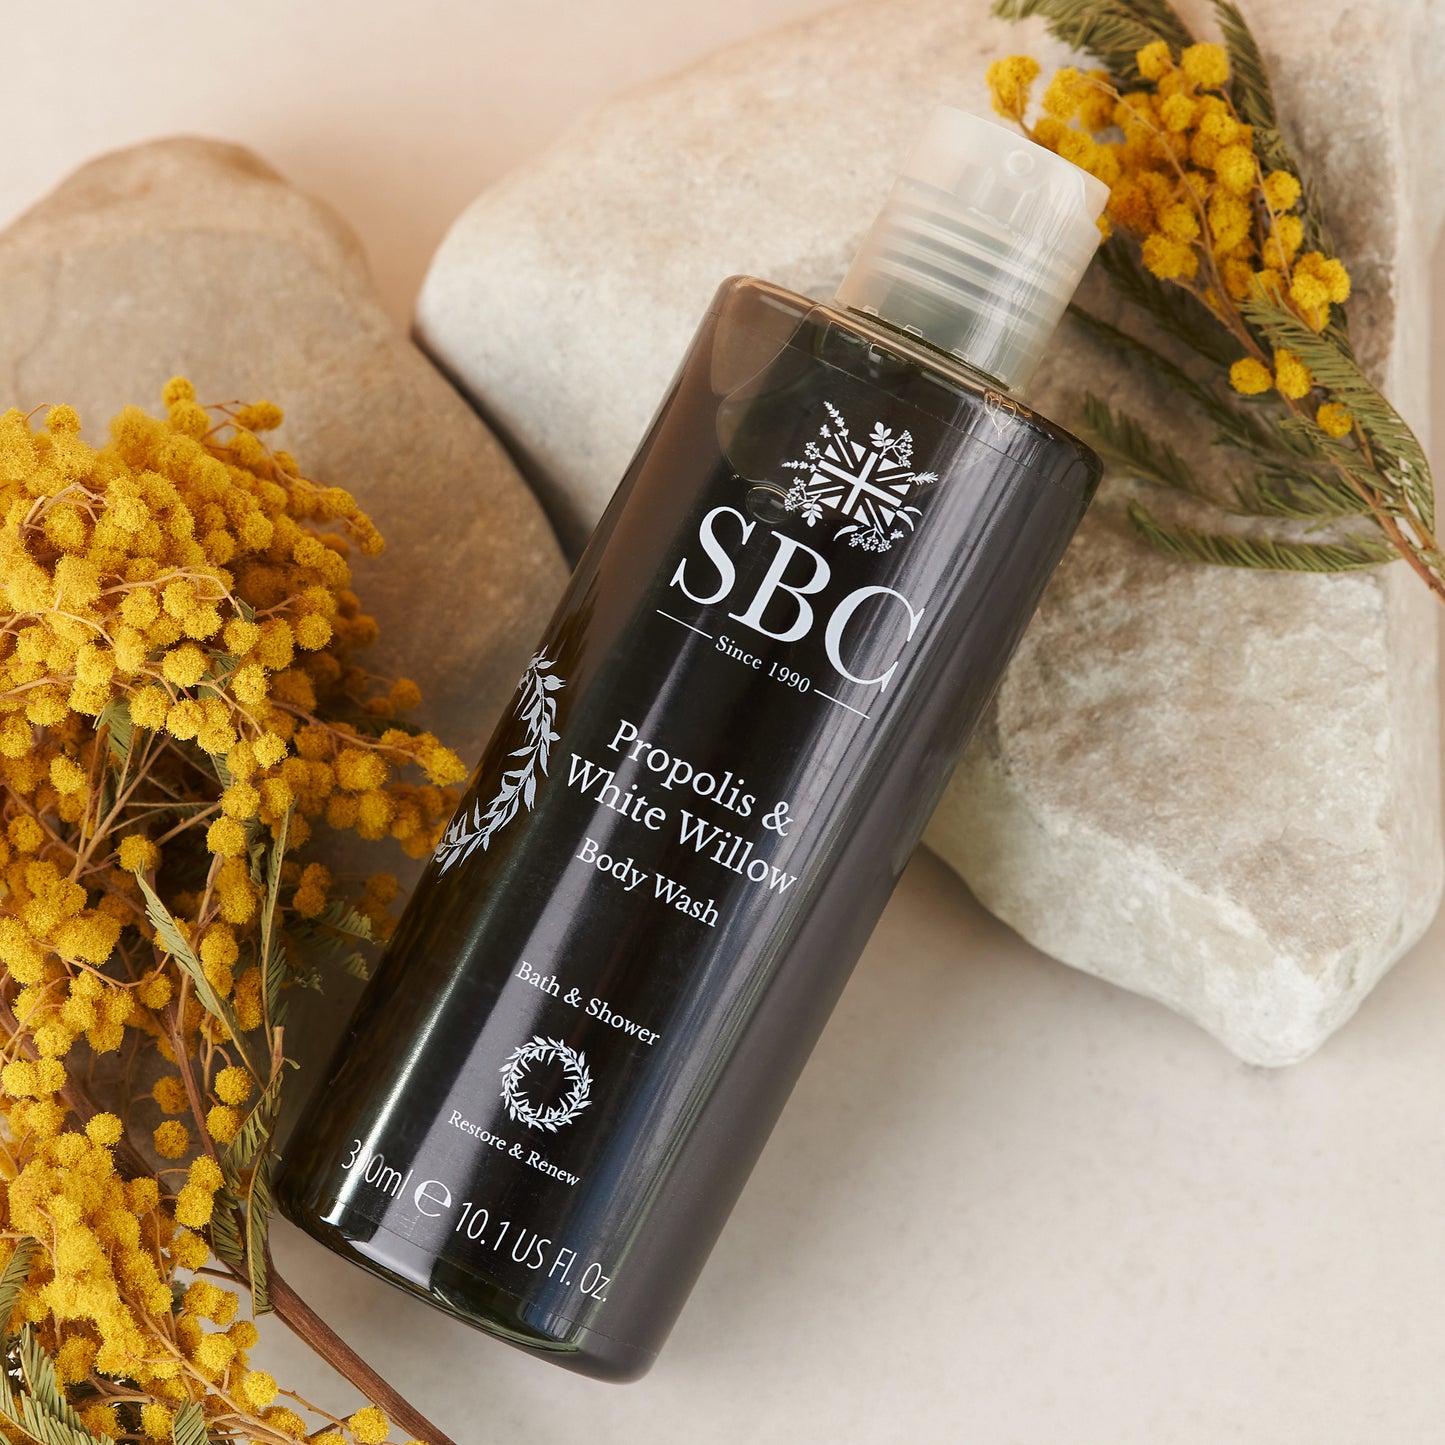 Propolis & White Willow Body Wash on sand stone with dried flowers 